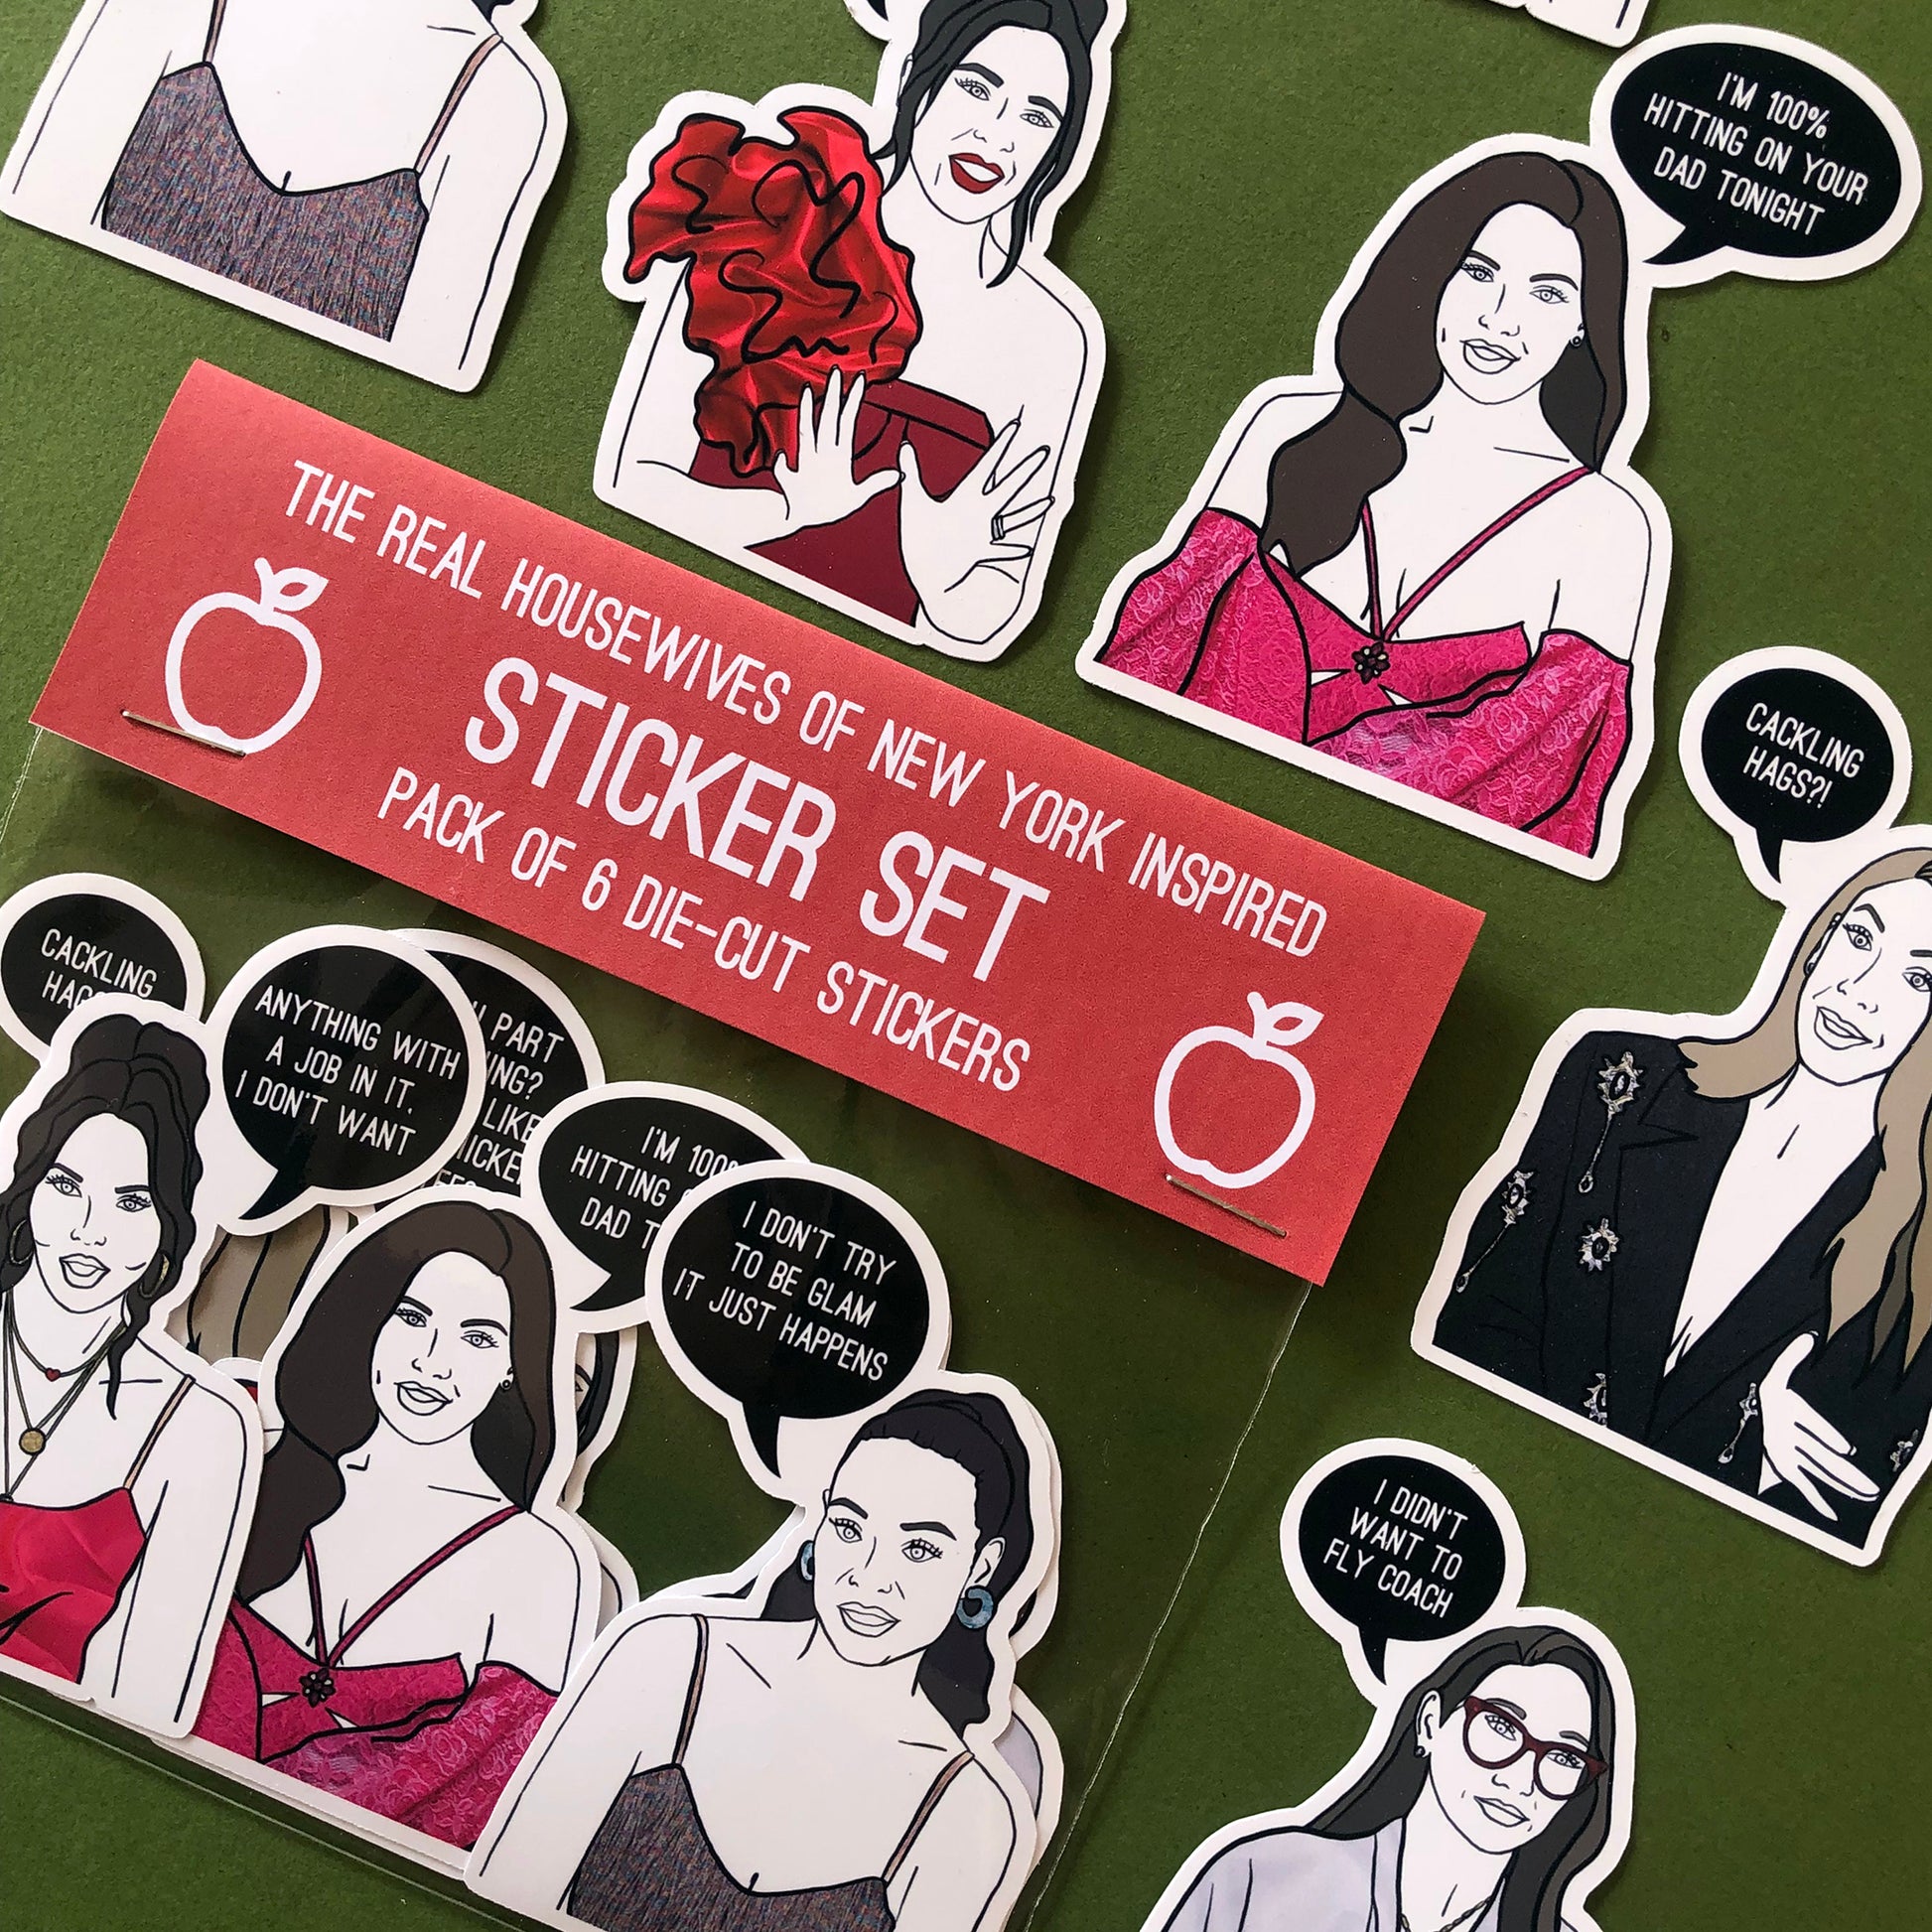 Image shows a collection of stickers inspired by reality tv series the Real Housewives of New York